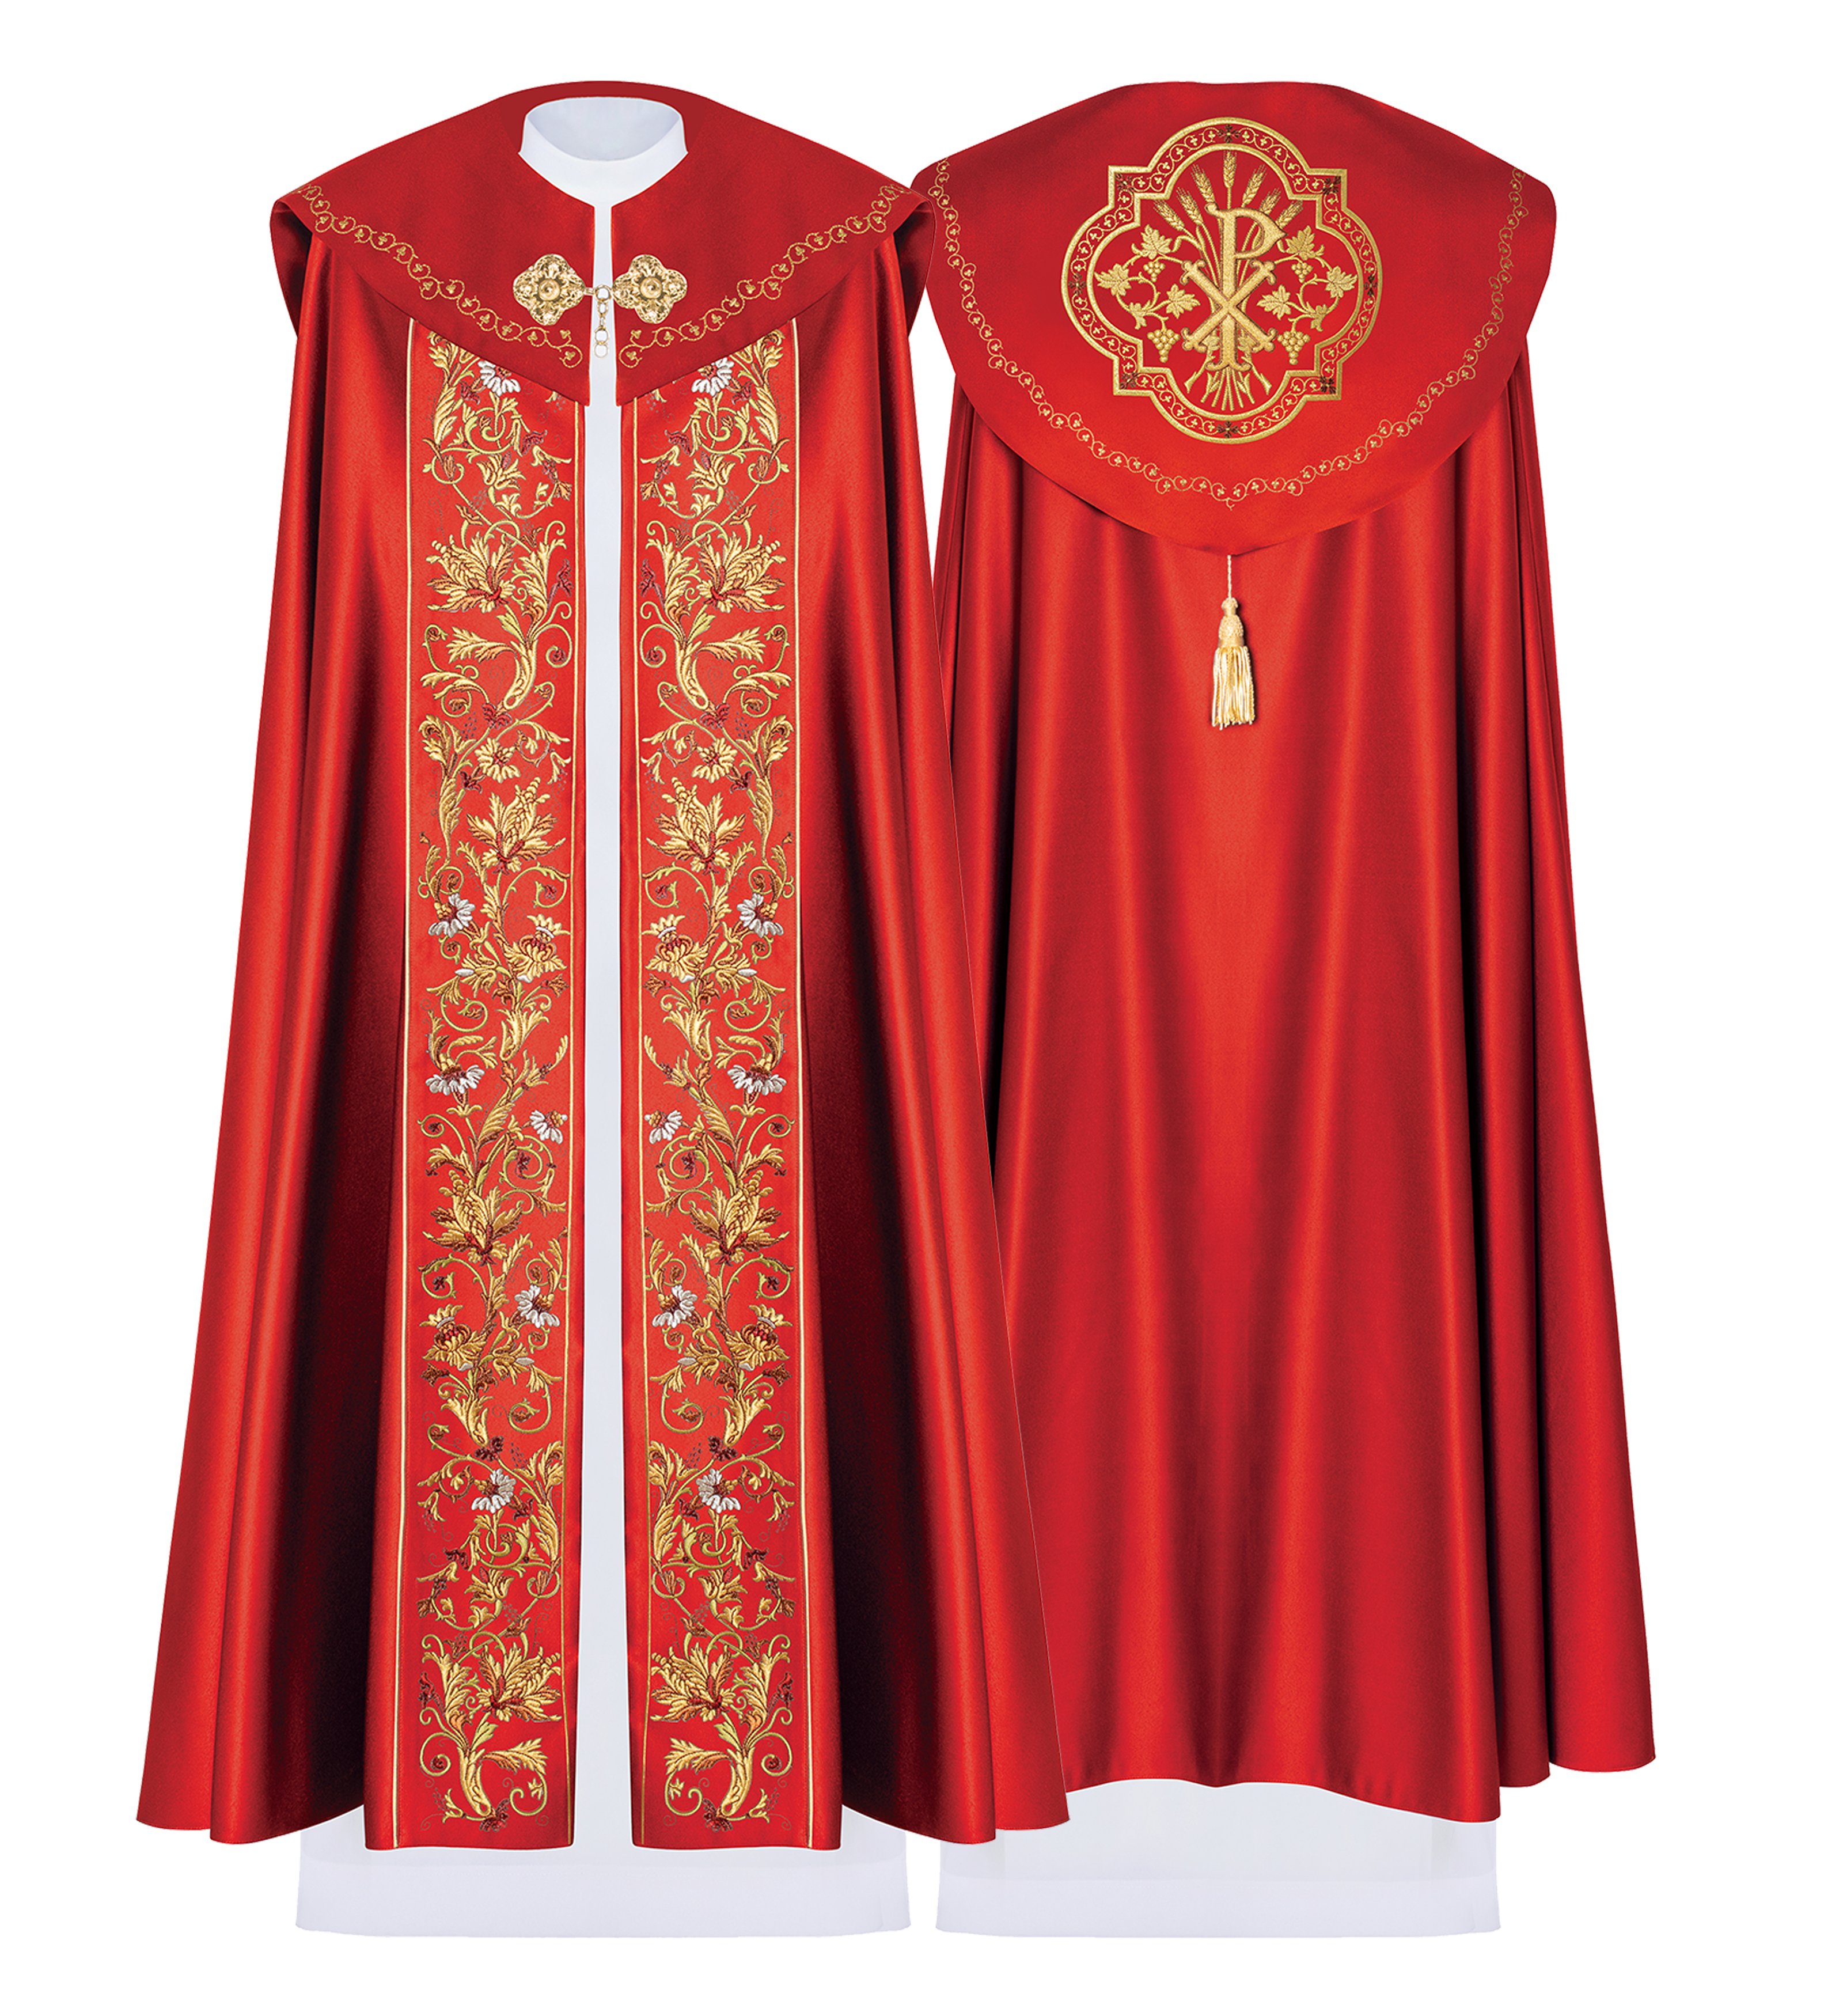 Eucharistic cape with richly decorated monogram in red